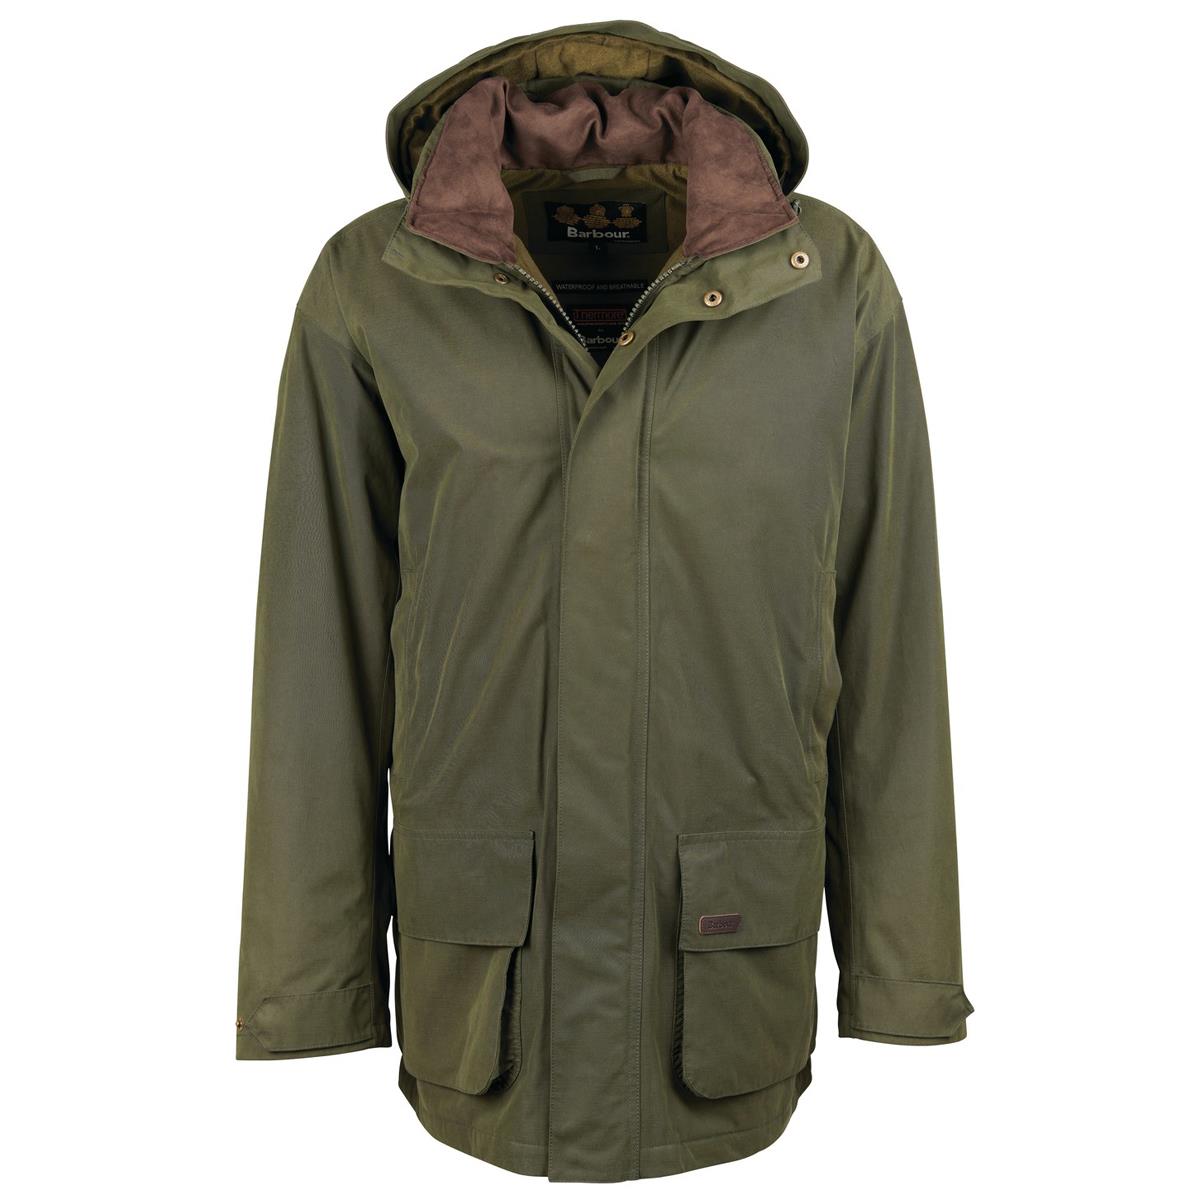 Can you provide the product reference number for the Barbour Beaconsfield Jacket?